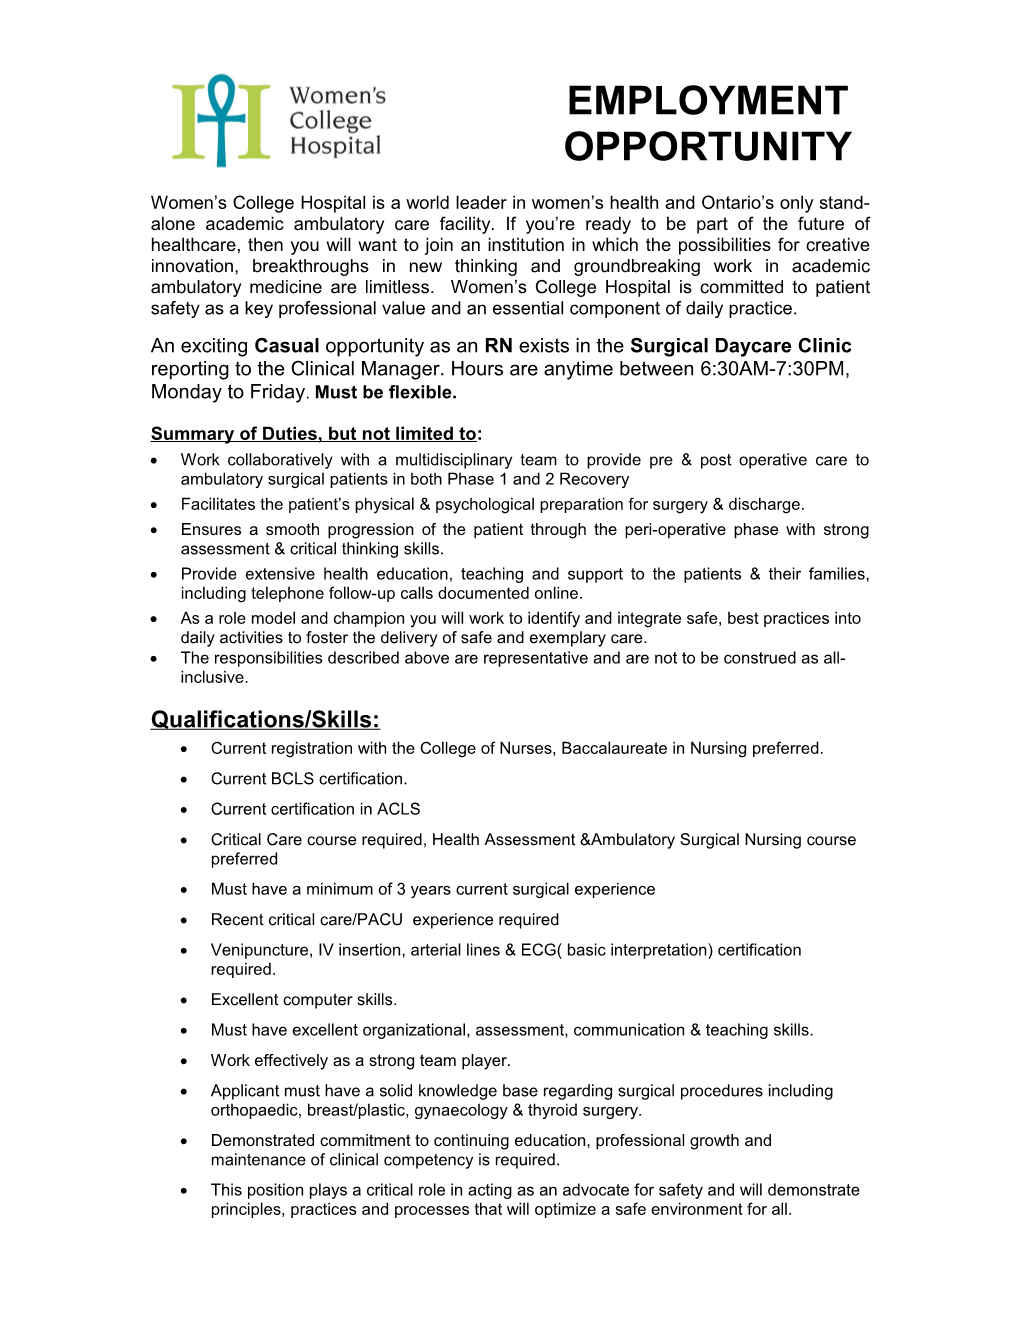 Employment Opportunity s28